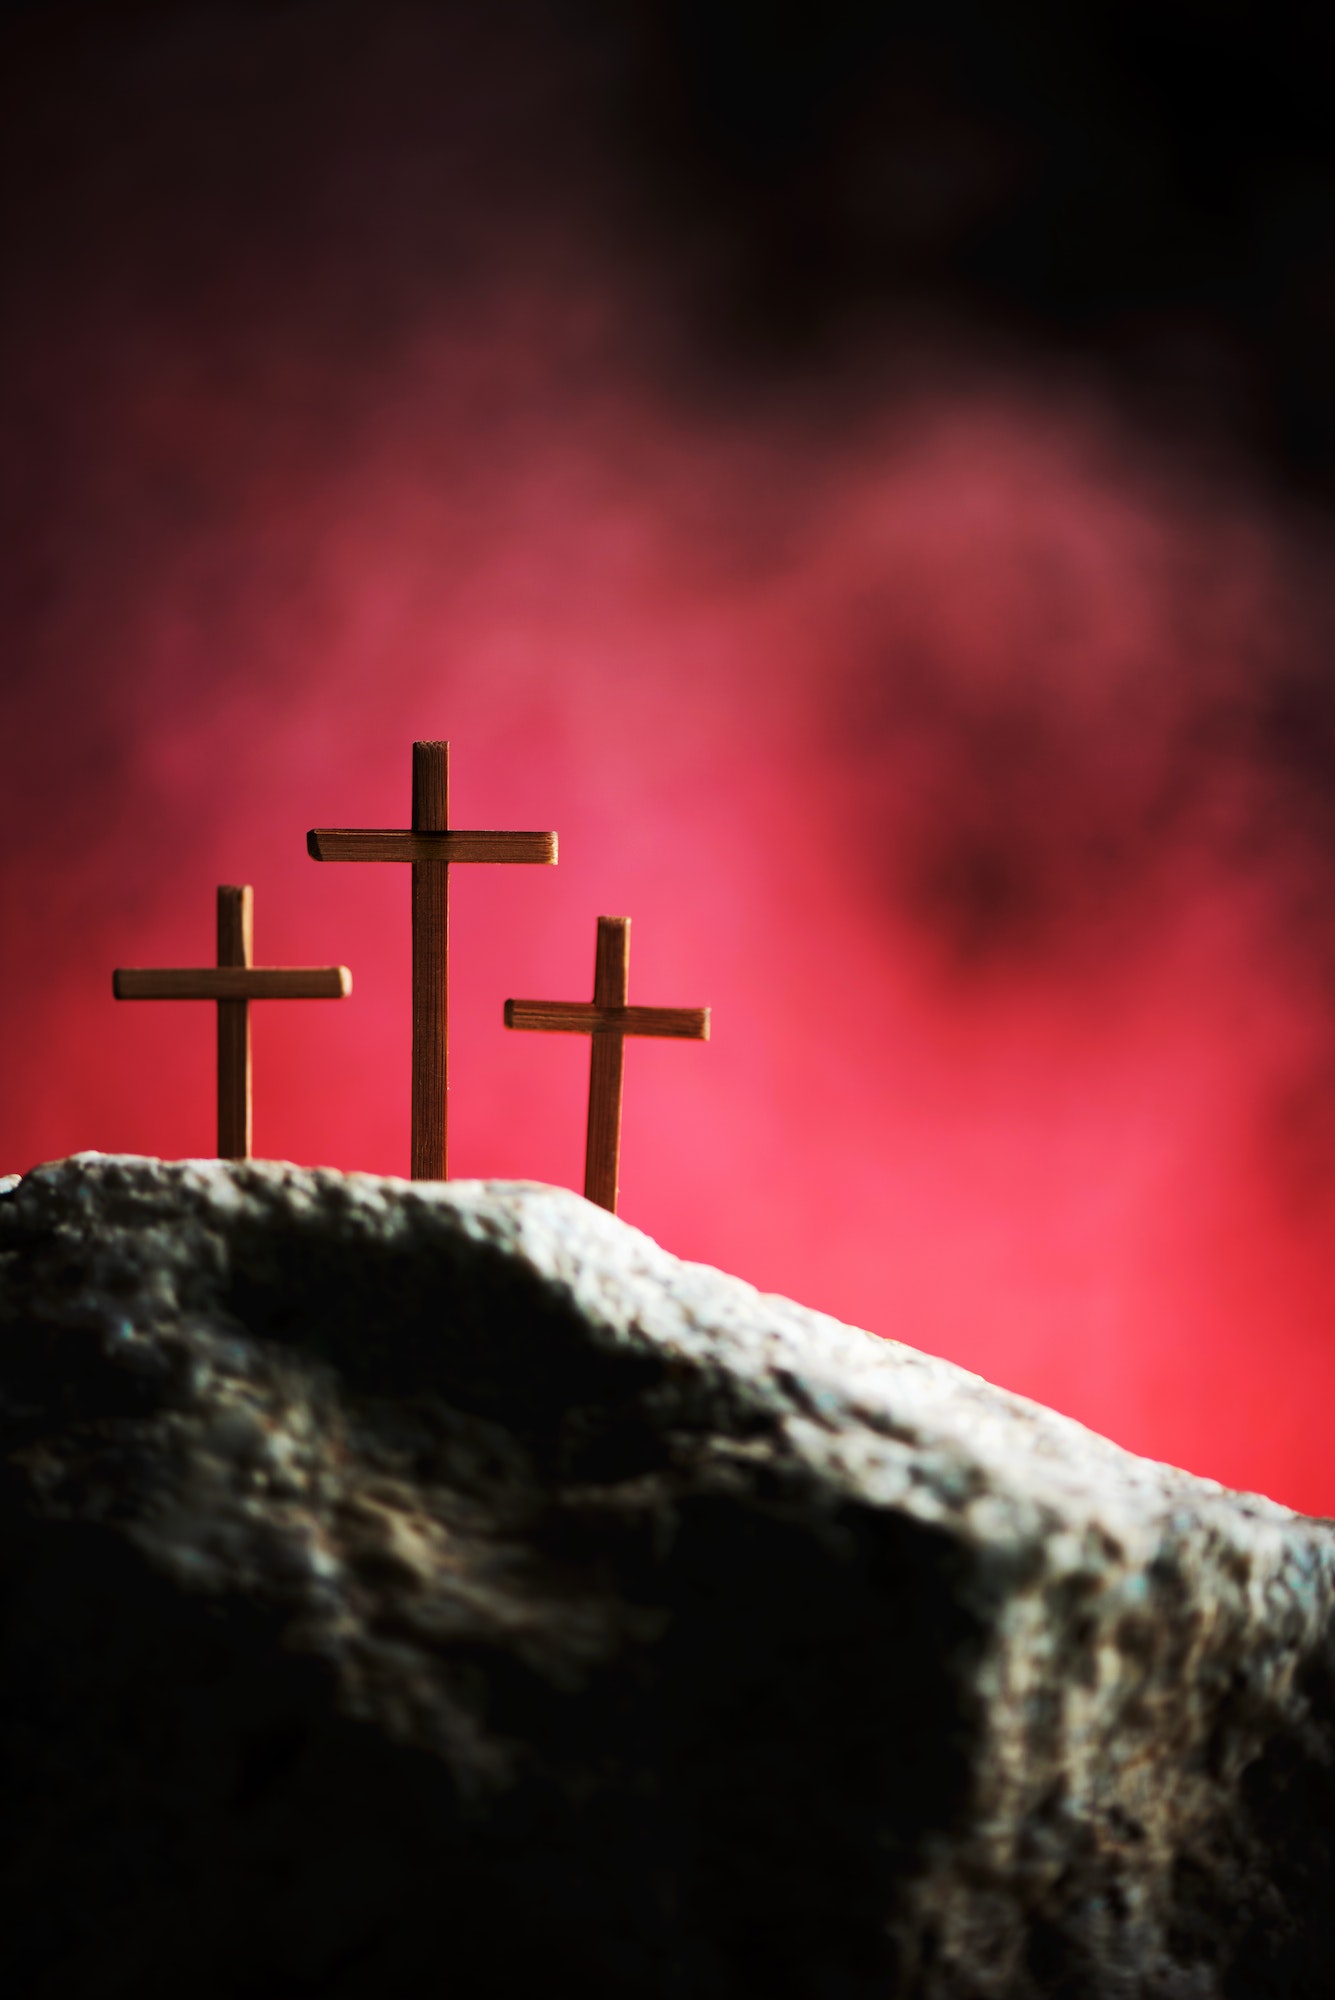 Crucifixion, resurrection of Jesus Christ. Three crosses against red sky on Calvary hill background